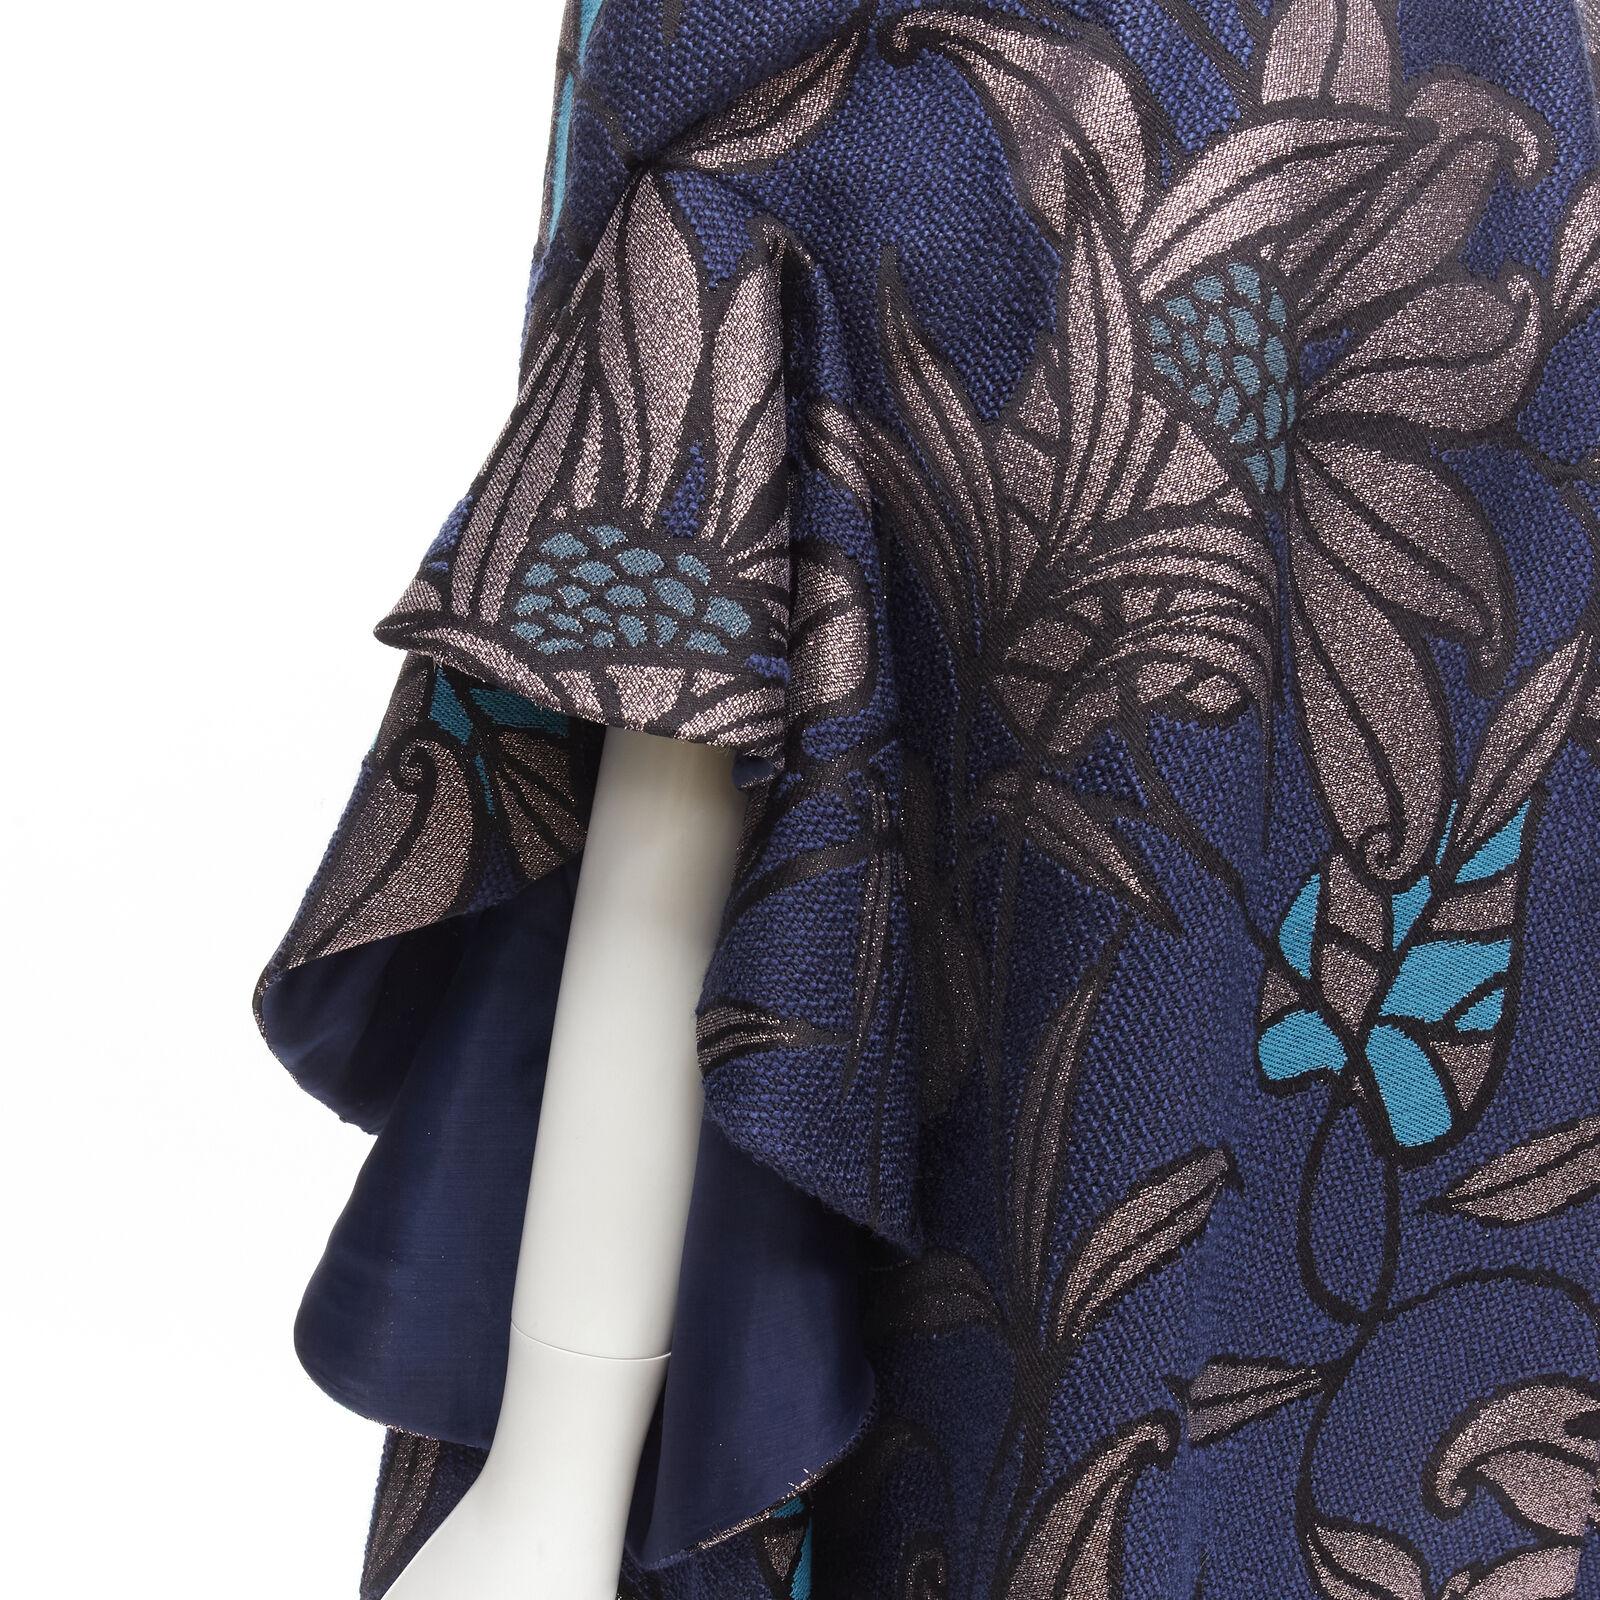 DELPOZO navy bluemetallic floral jacquard ruffled oversized cape coat FR34 XS
Reference: LNKO/A02044
Brand: Delpozo
Material: Cotton, Silk
Color: Blue
Pattern: Floral
Closure: Snap Buttons
Lining: Viscose
Extra Details: Pink metallic floral jacquard